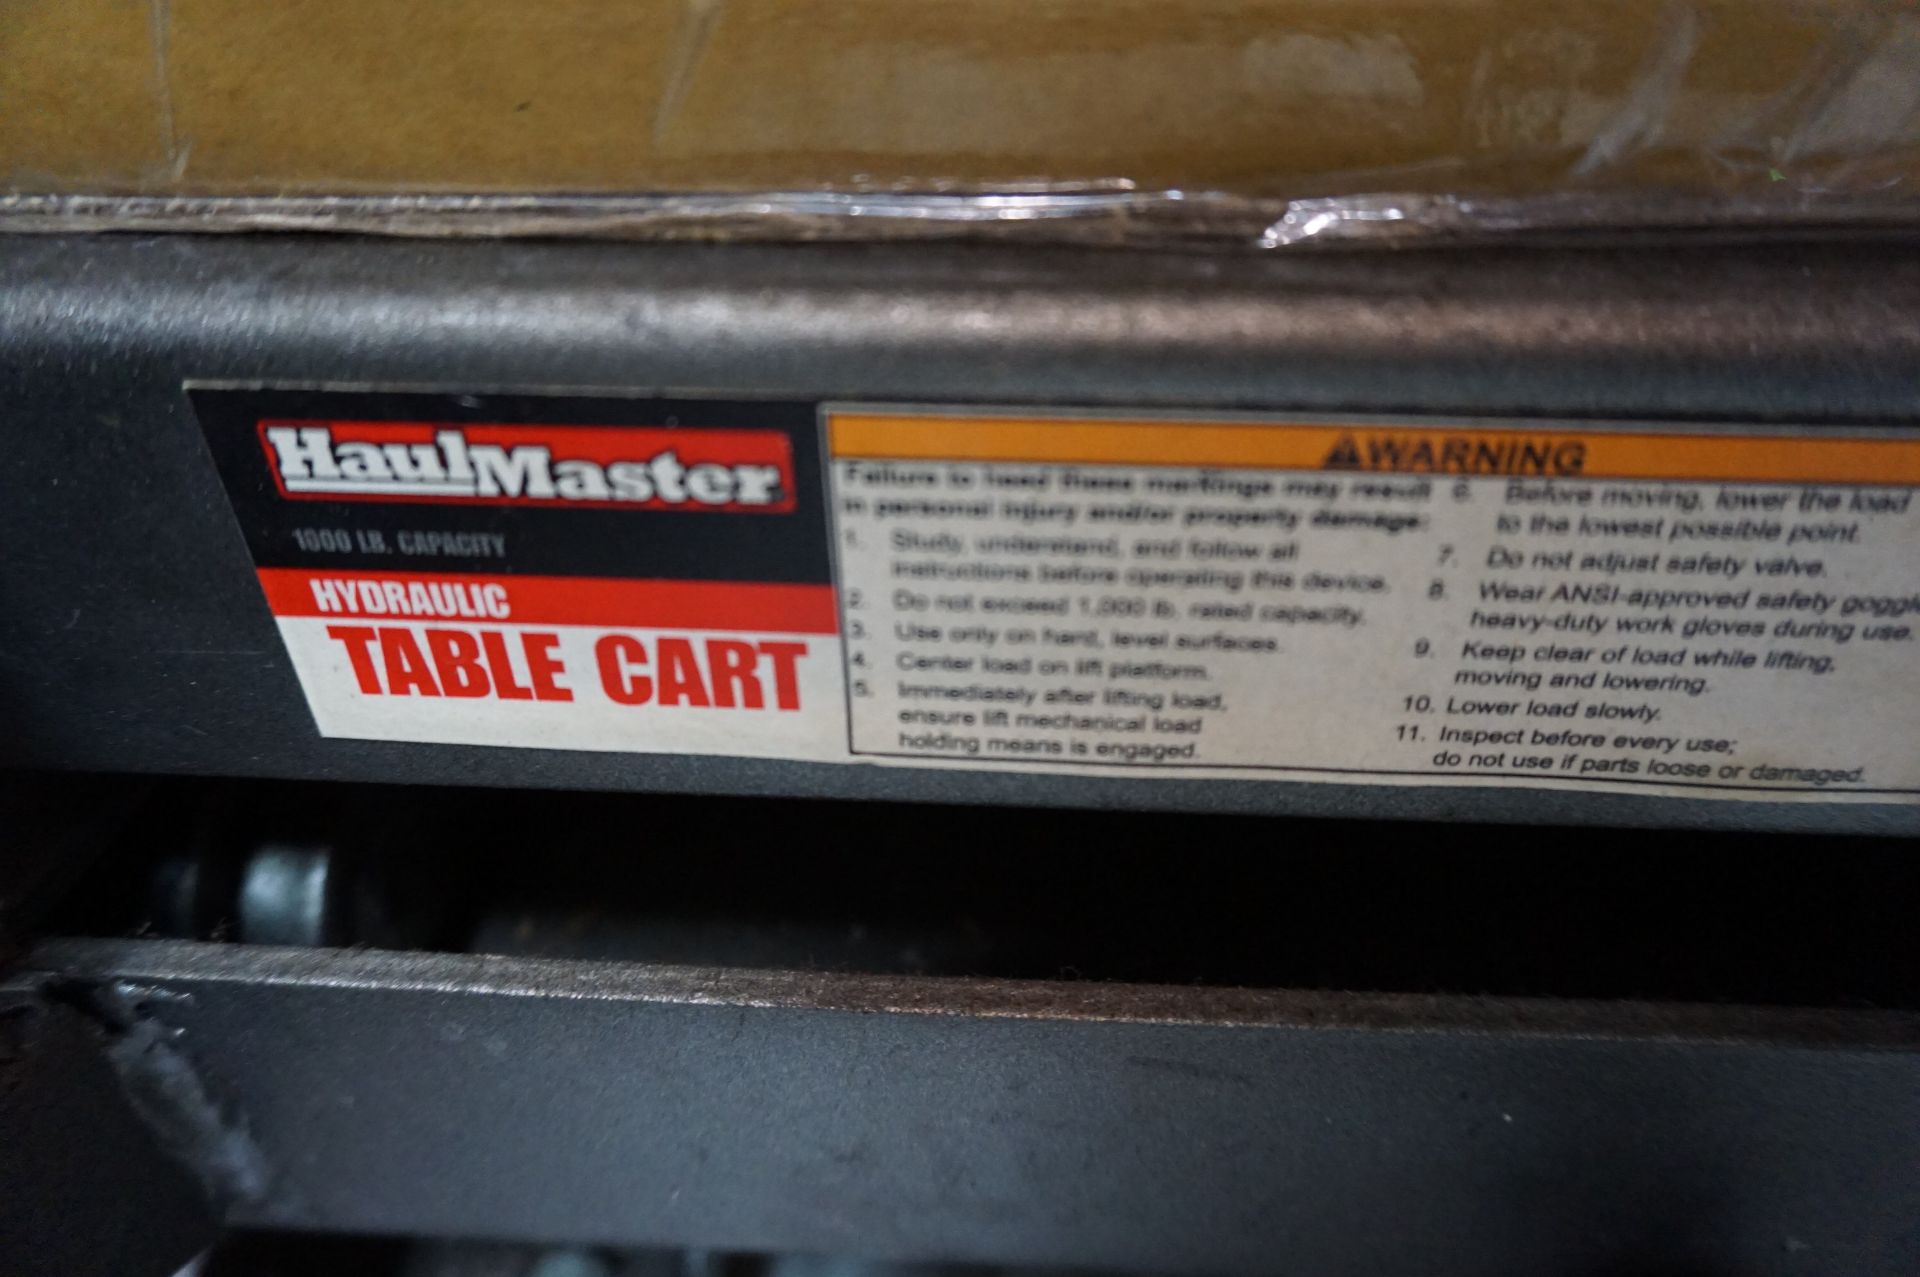 HAUL MASTER 1000 CAPACITY HYDRAULIC TABLE CART *NO CONTENTS CART ONLY* - Image 2 of 2